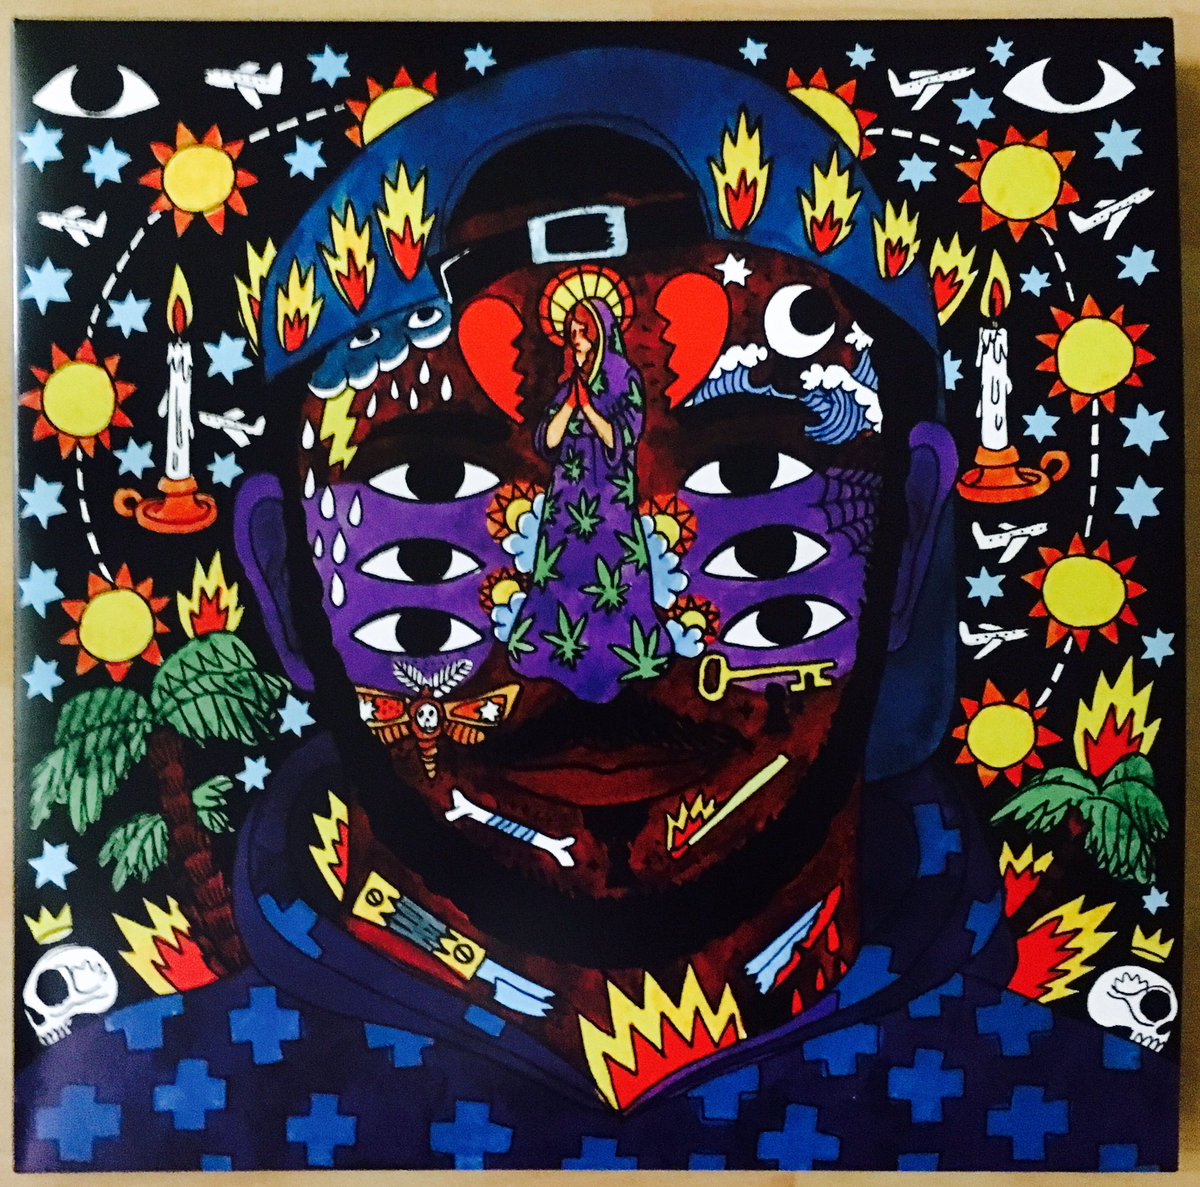 Perfect album to start a summer weekend: @KAYTRANADA 's debut '99.9%' is 100% great rhythms, beats and sound! #vinyl